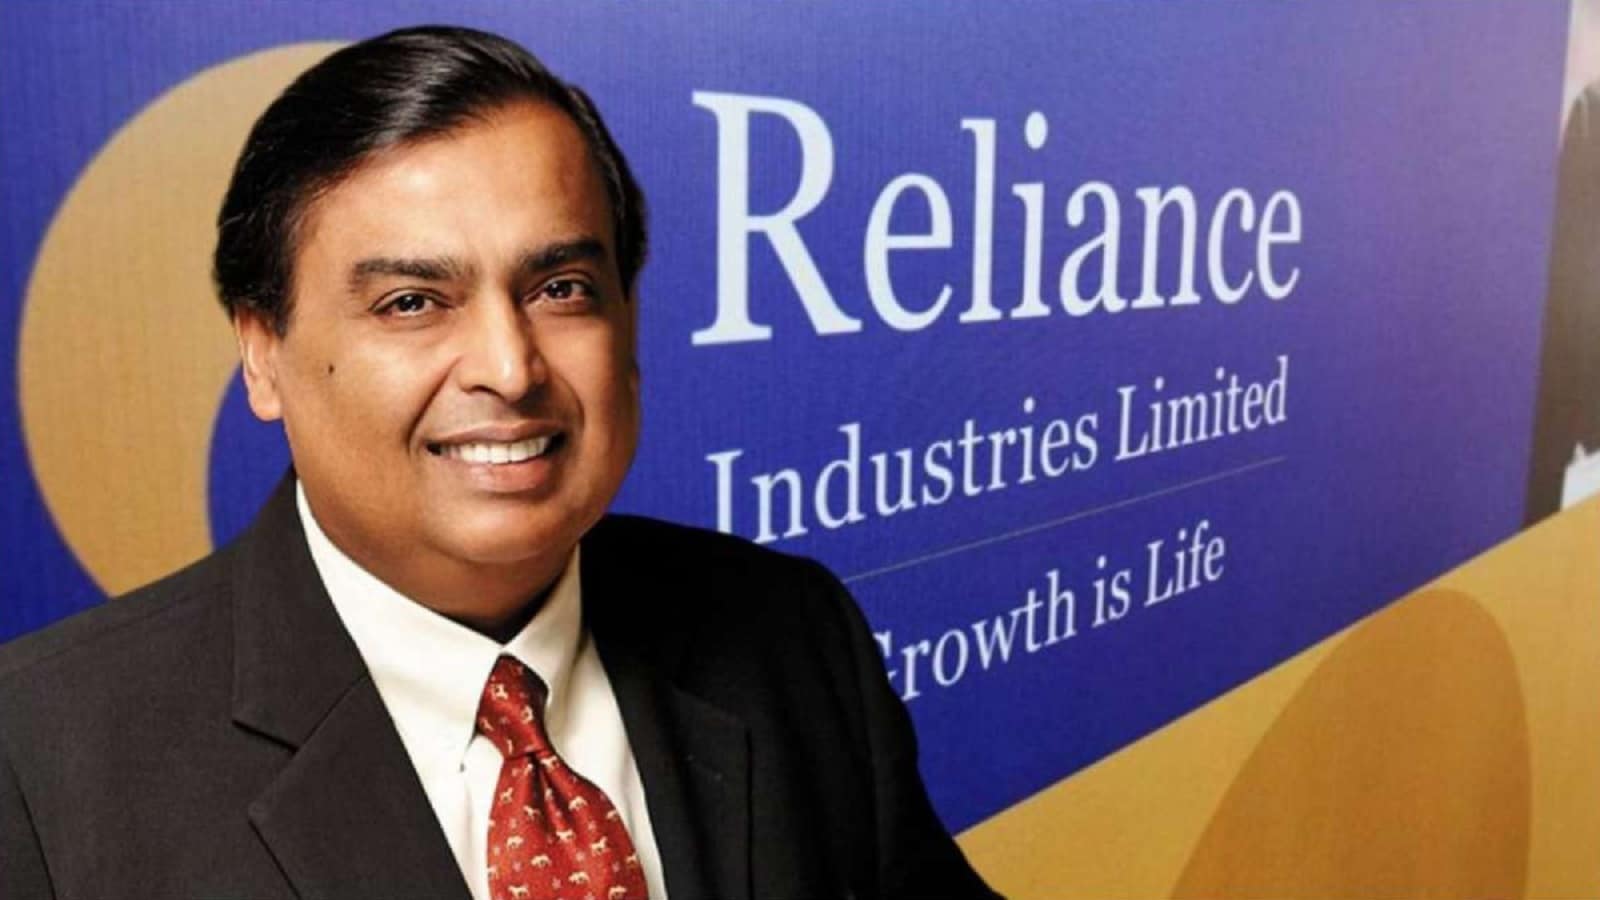 Reliance Industries Limited reports net profit of Rs 15 512 crore in Q2 FY23